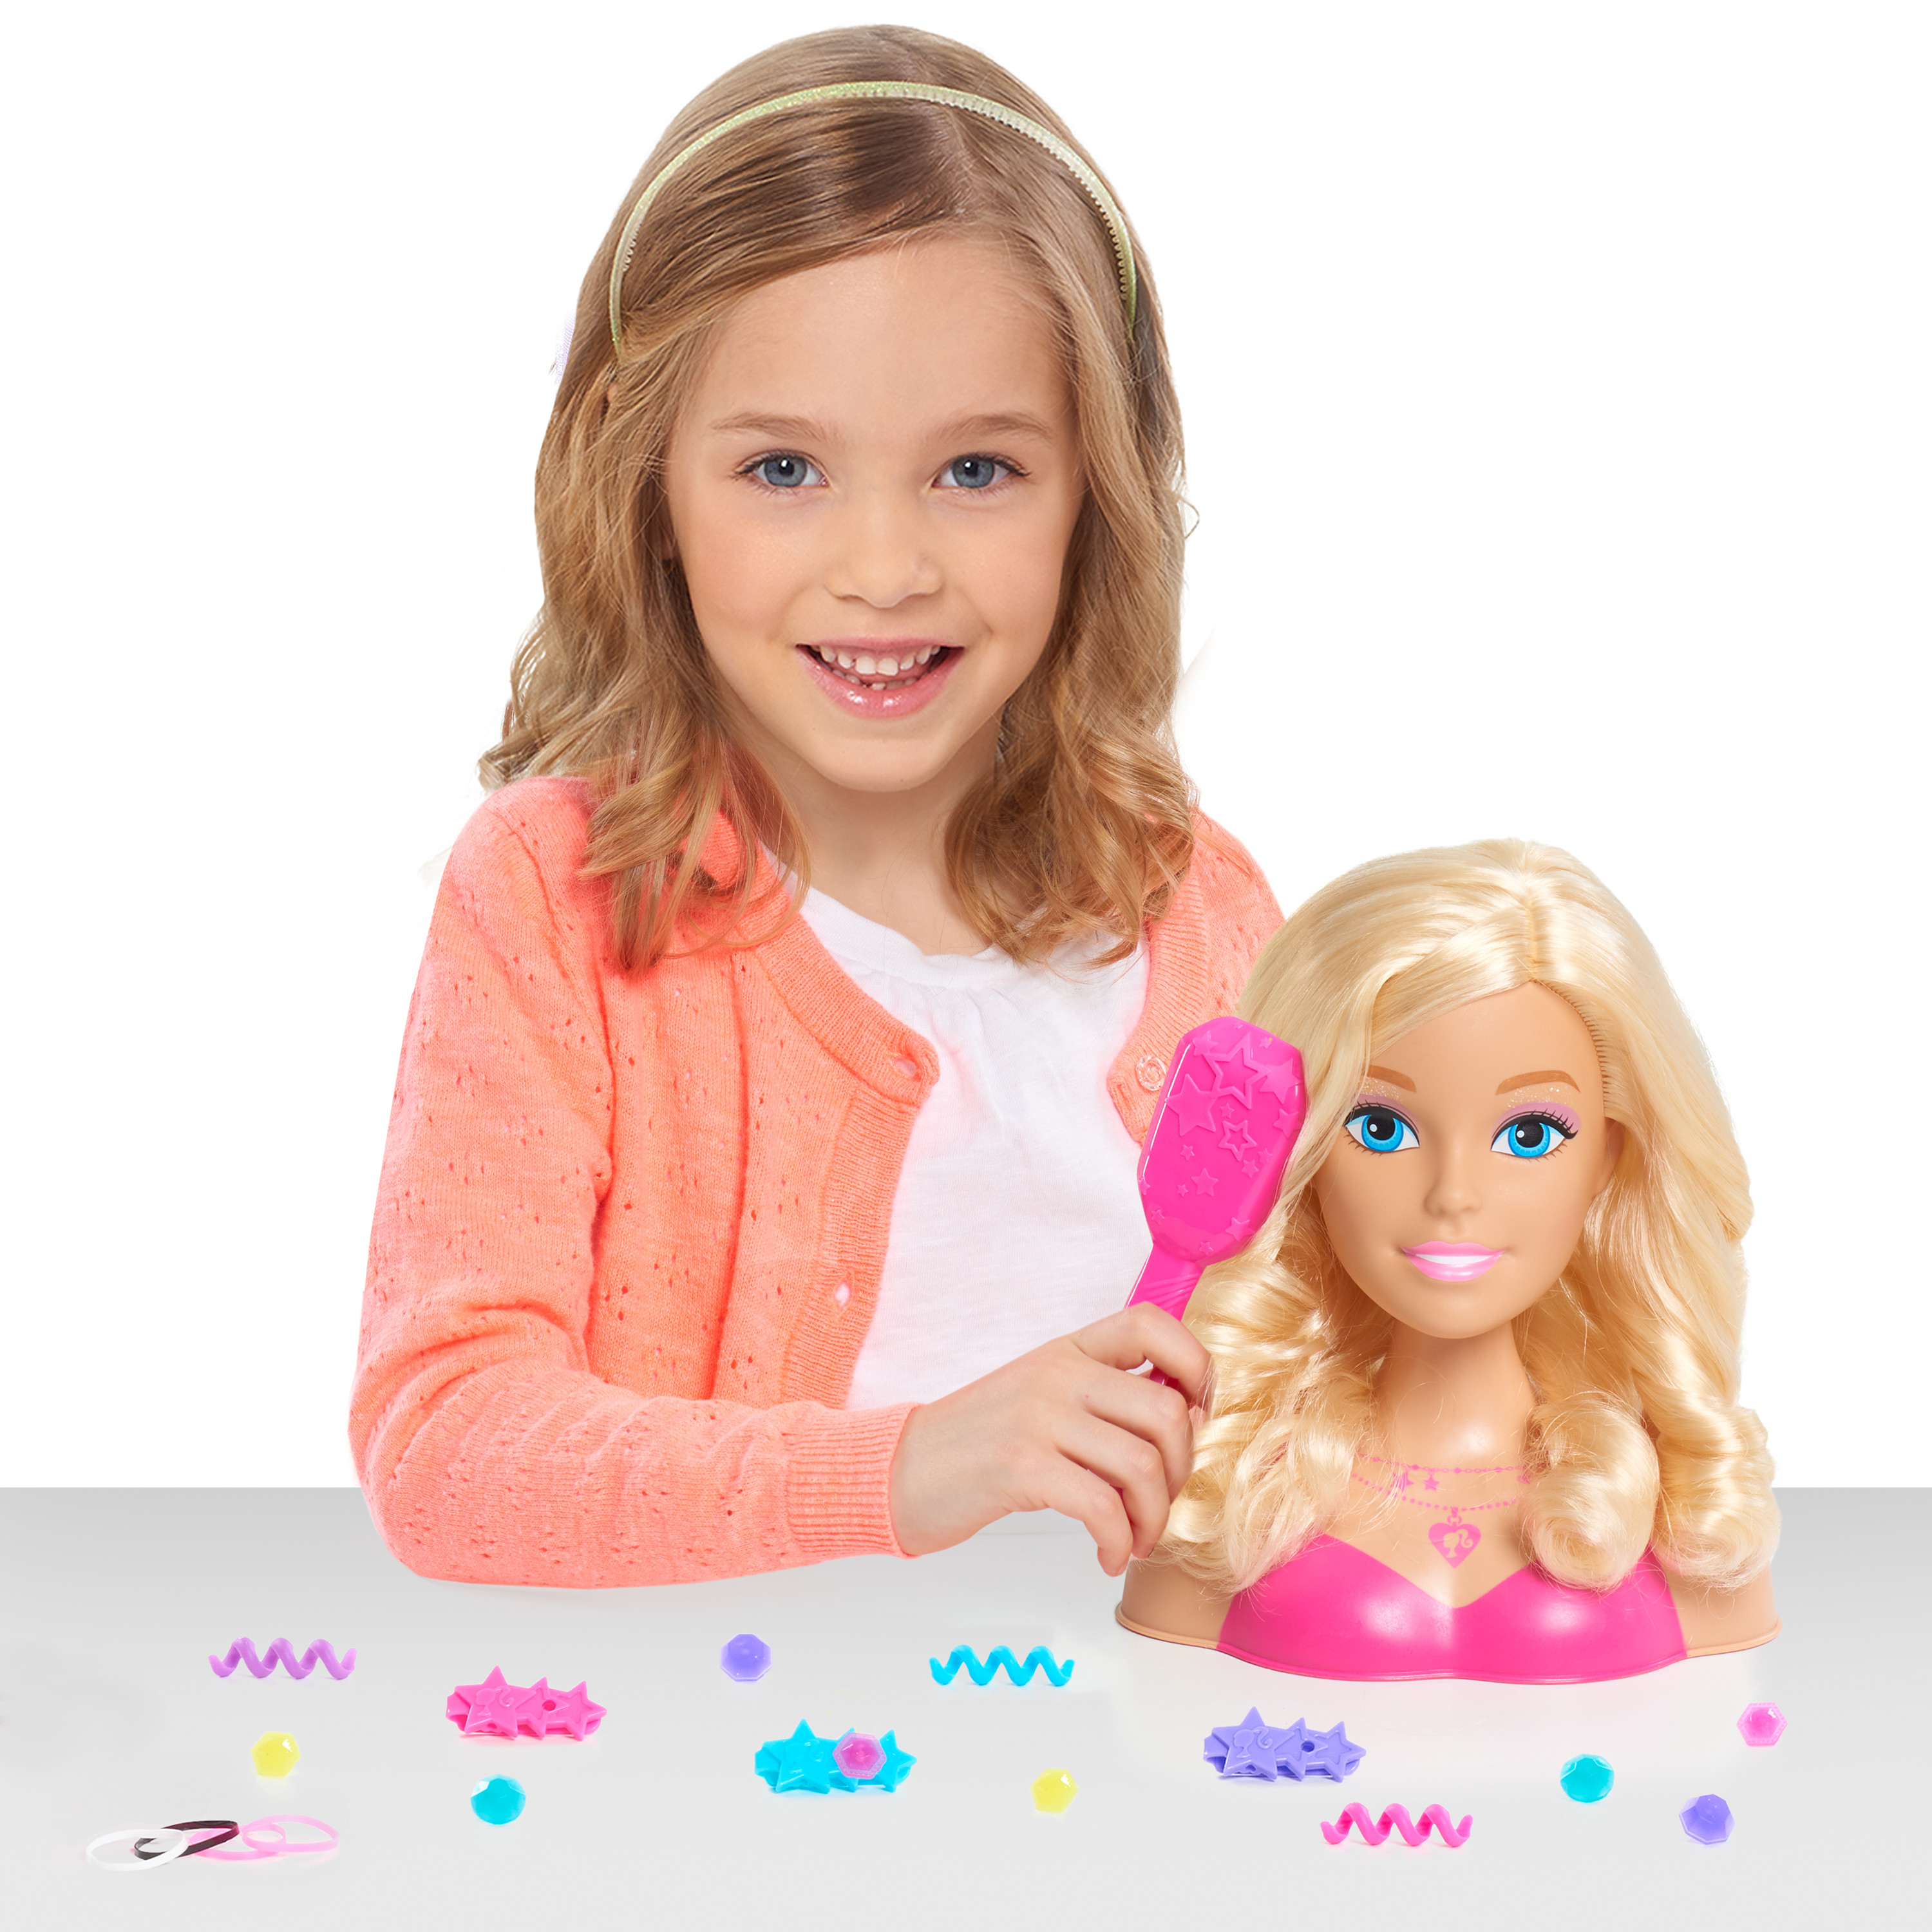 Just Play Barbie Fashionistas 20 Piece Styling Head for Kids, Blonde Hair, Preschool Ages 3 up - image 1 of 6